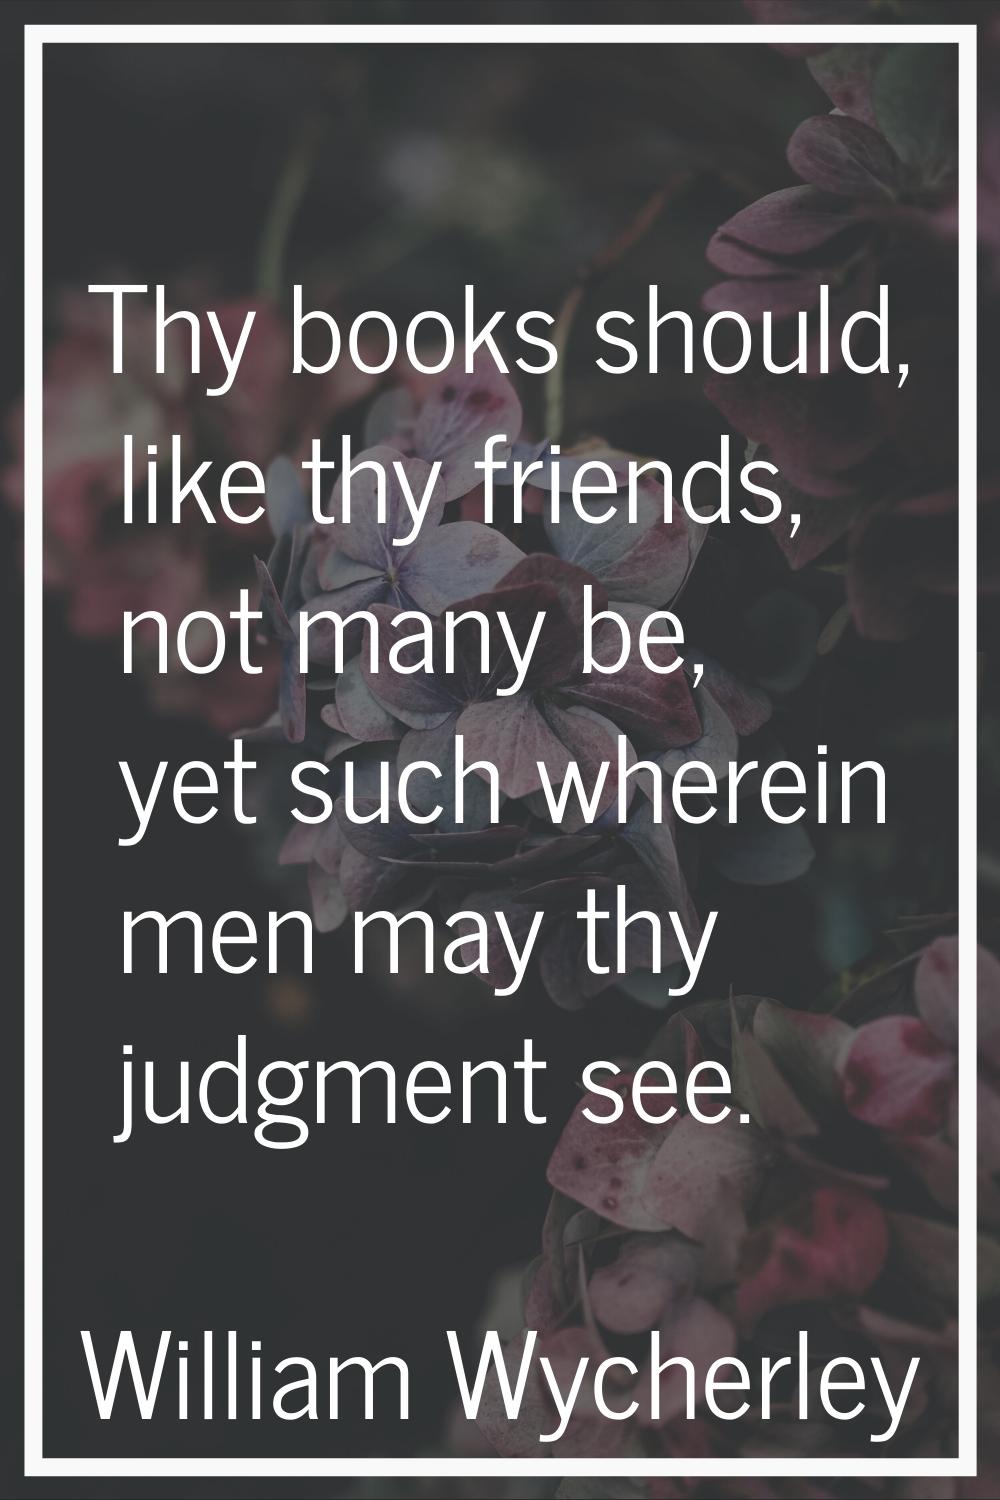 Thy books should, like thy friends, not many be, yet such wherein men may thy judgment see.